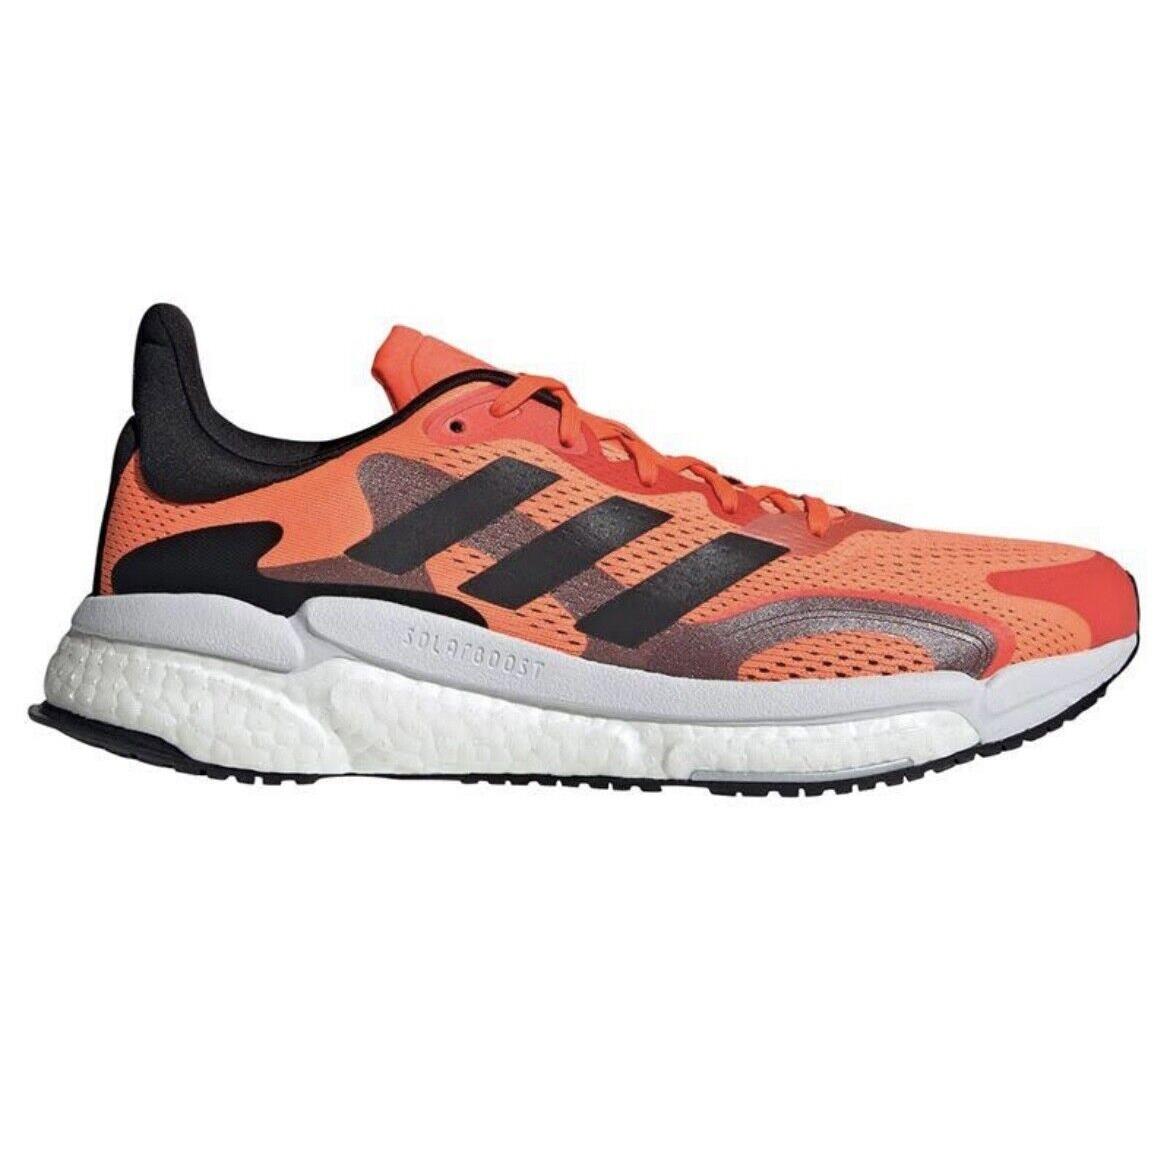 Adidas Solar Boost 3 Mens Casual Running Shoe Red Black Trainer Gym Sneaker